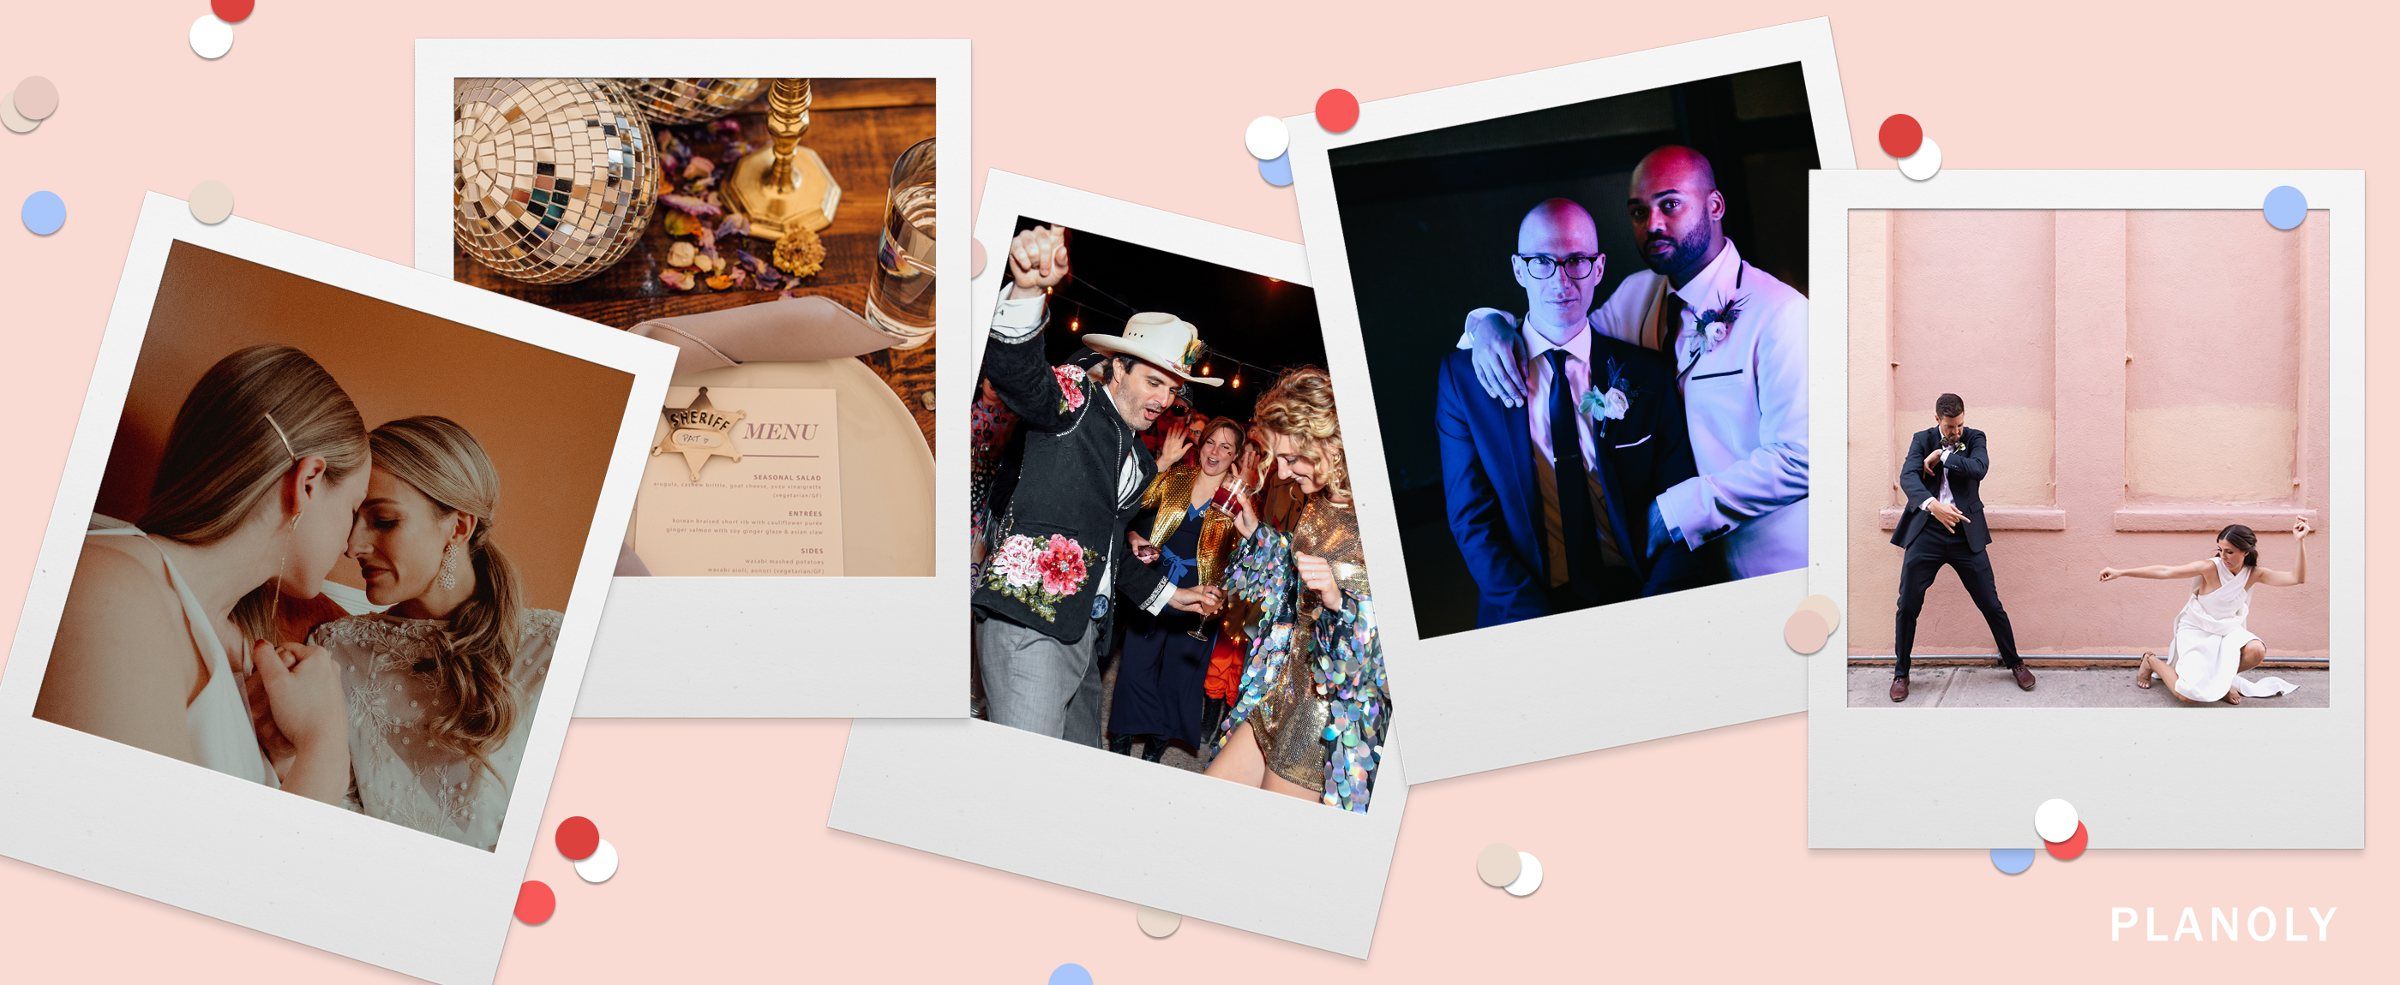 Modern Rebel is Changing the Wedding Industry with its Relationship-First “Love Parties”